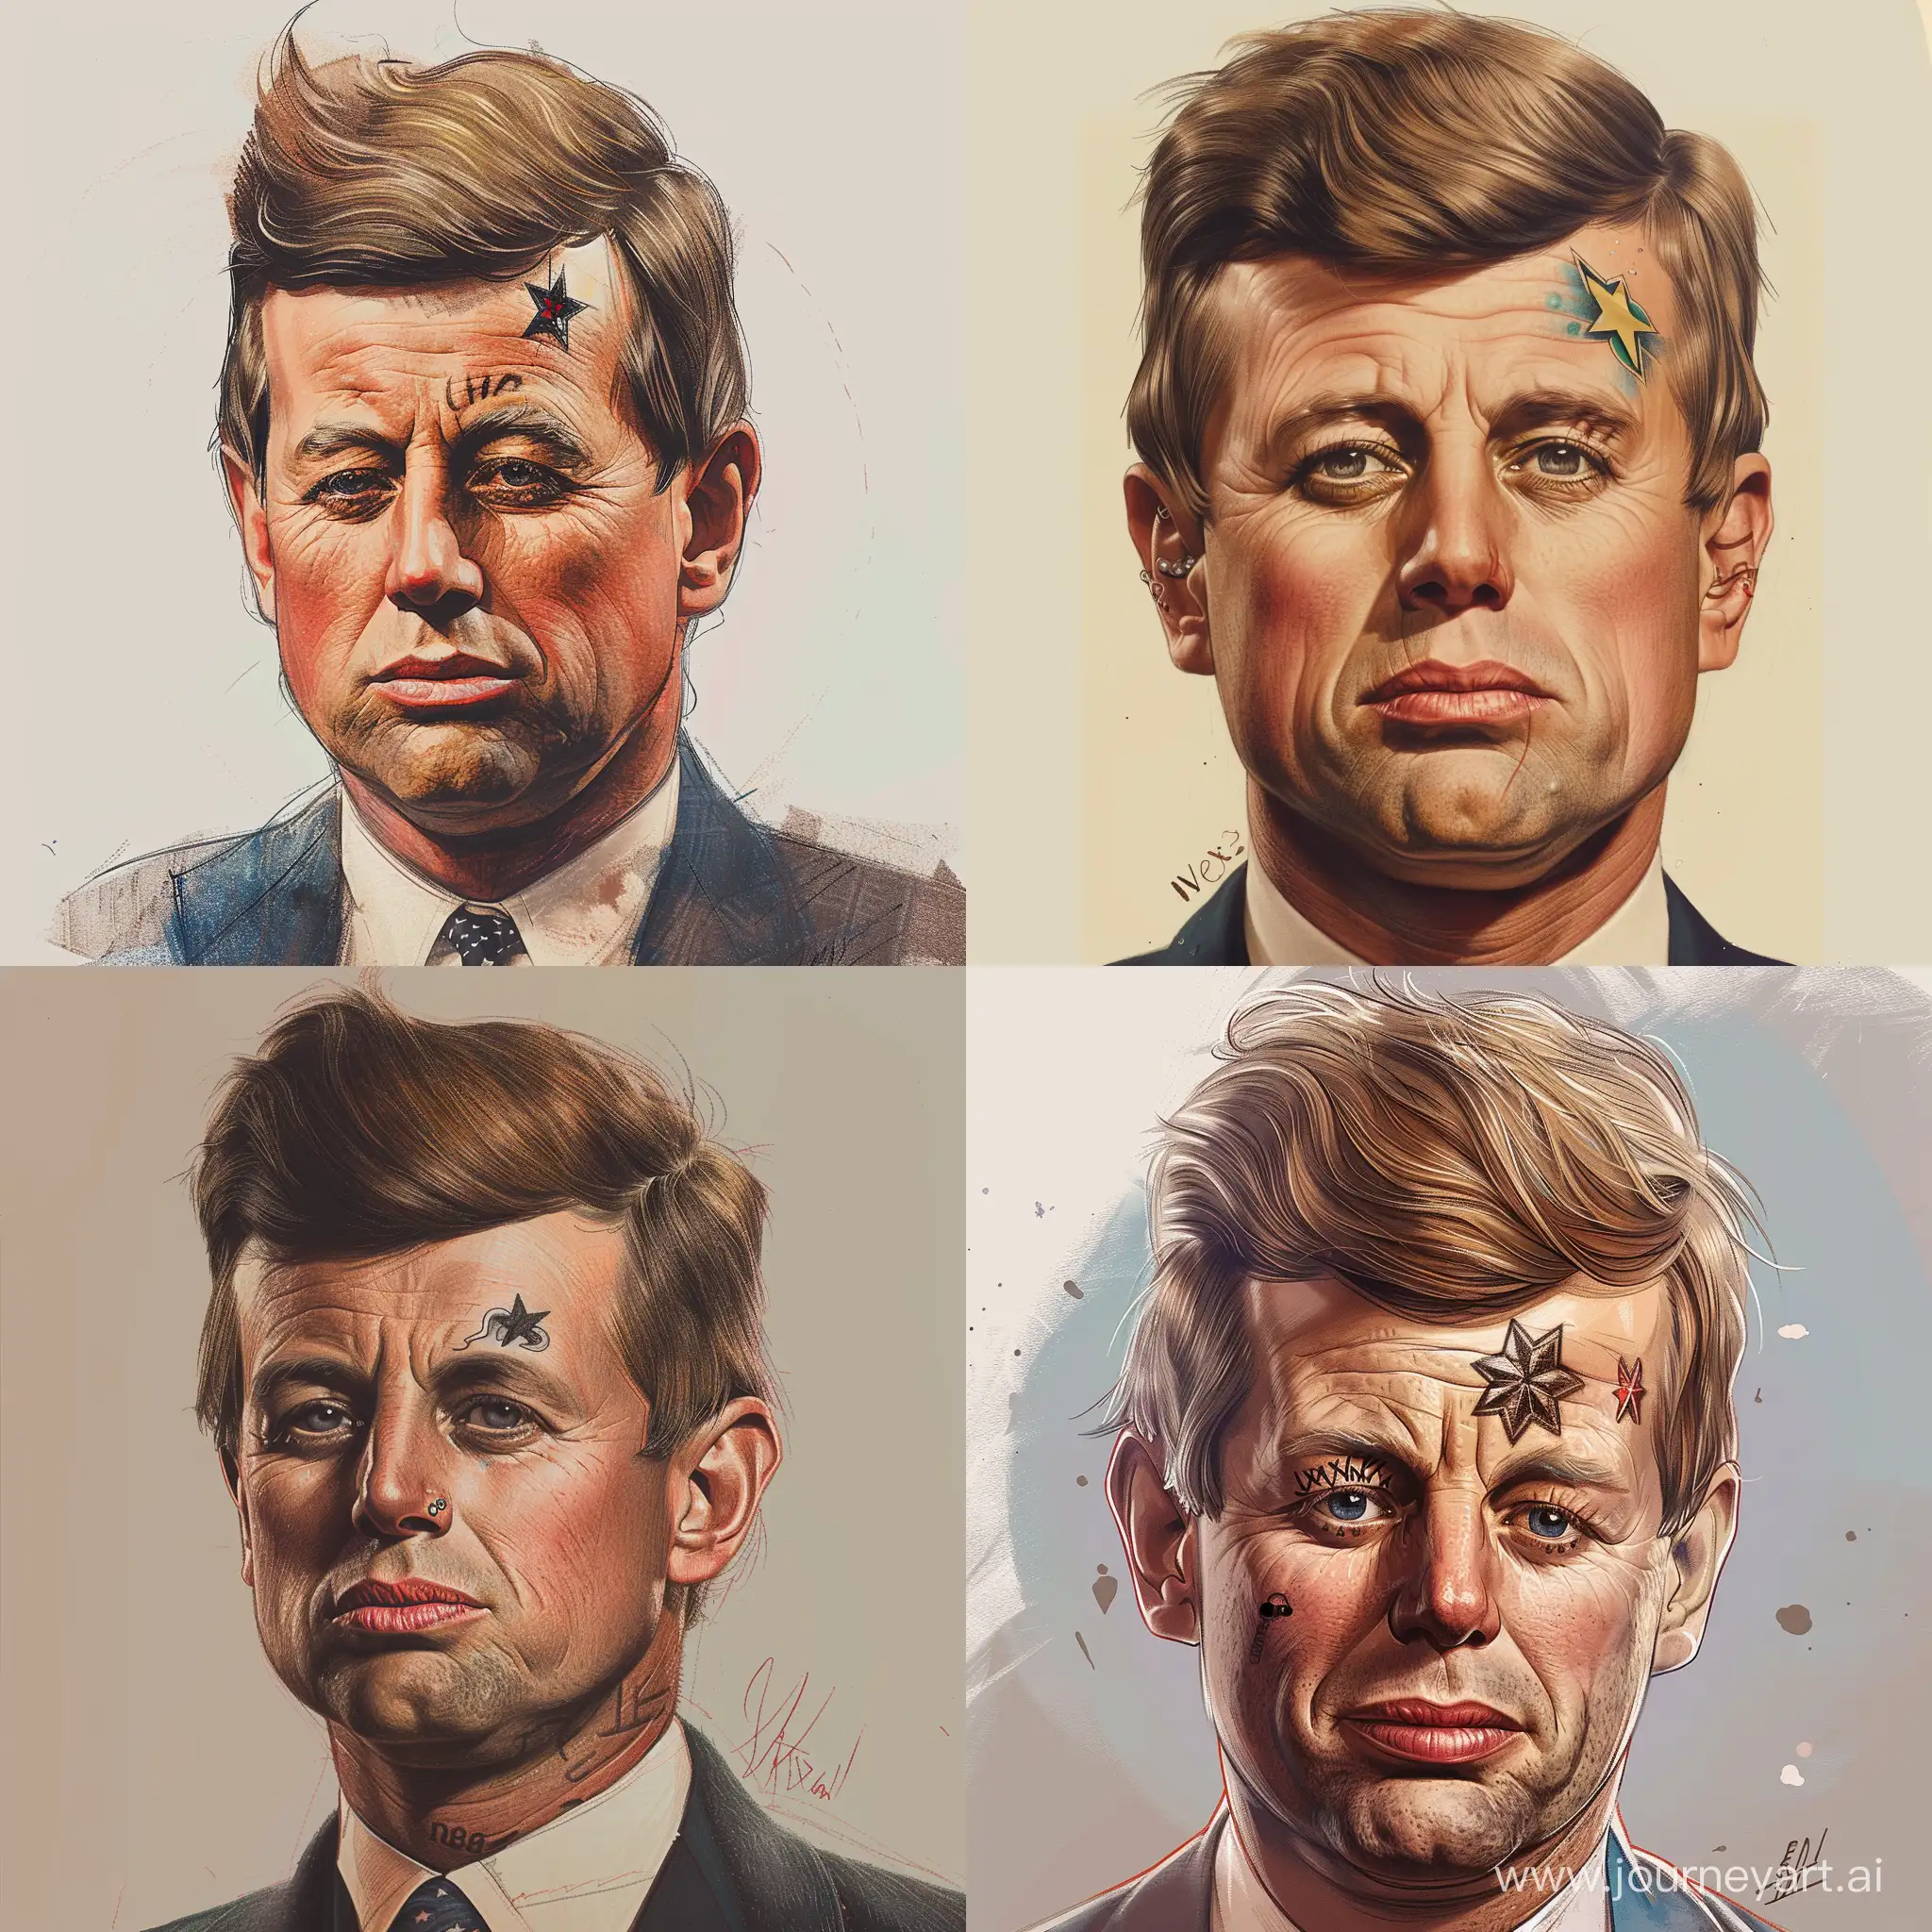 Draw John Kennedy with a rapper like tattoo above the eyebrow. Try to make the art as much realistic as possible and make it colorful.